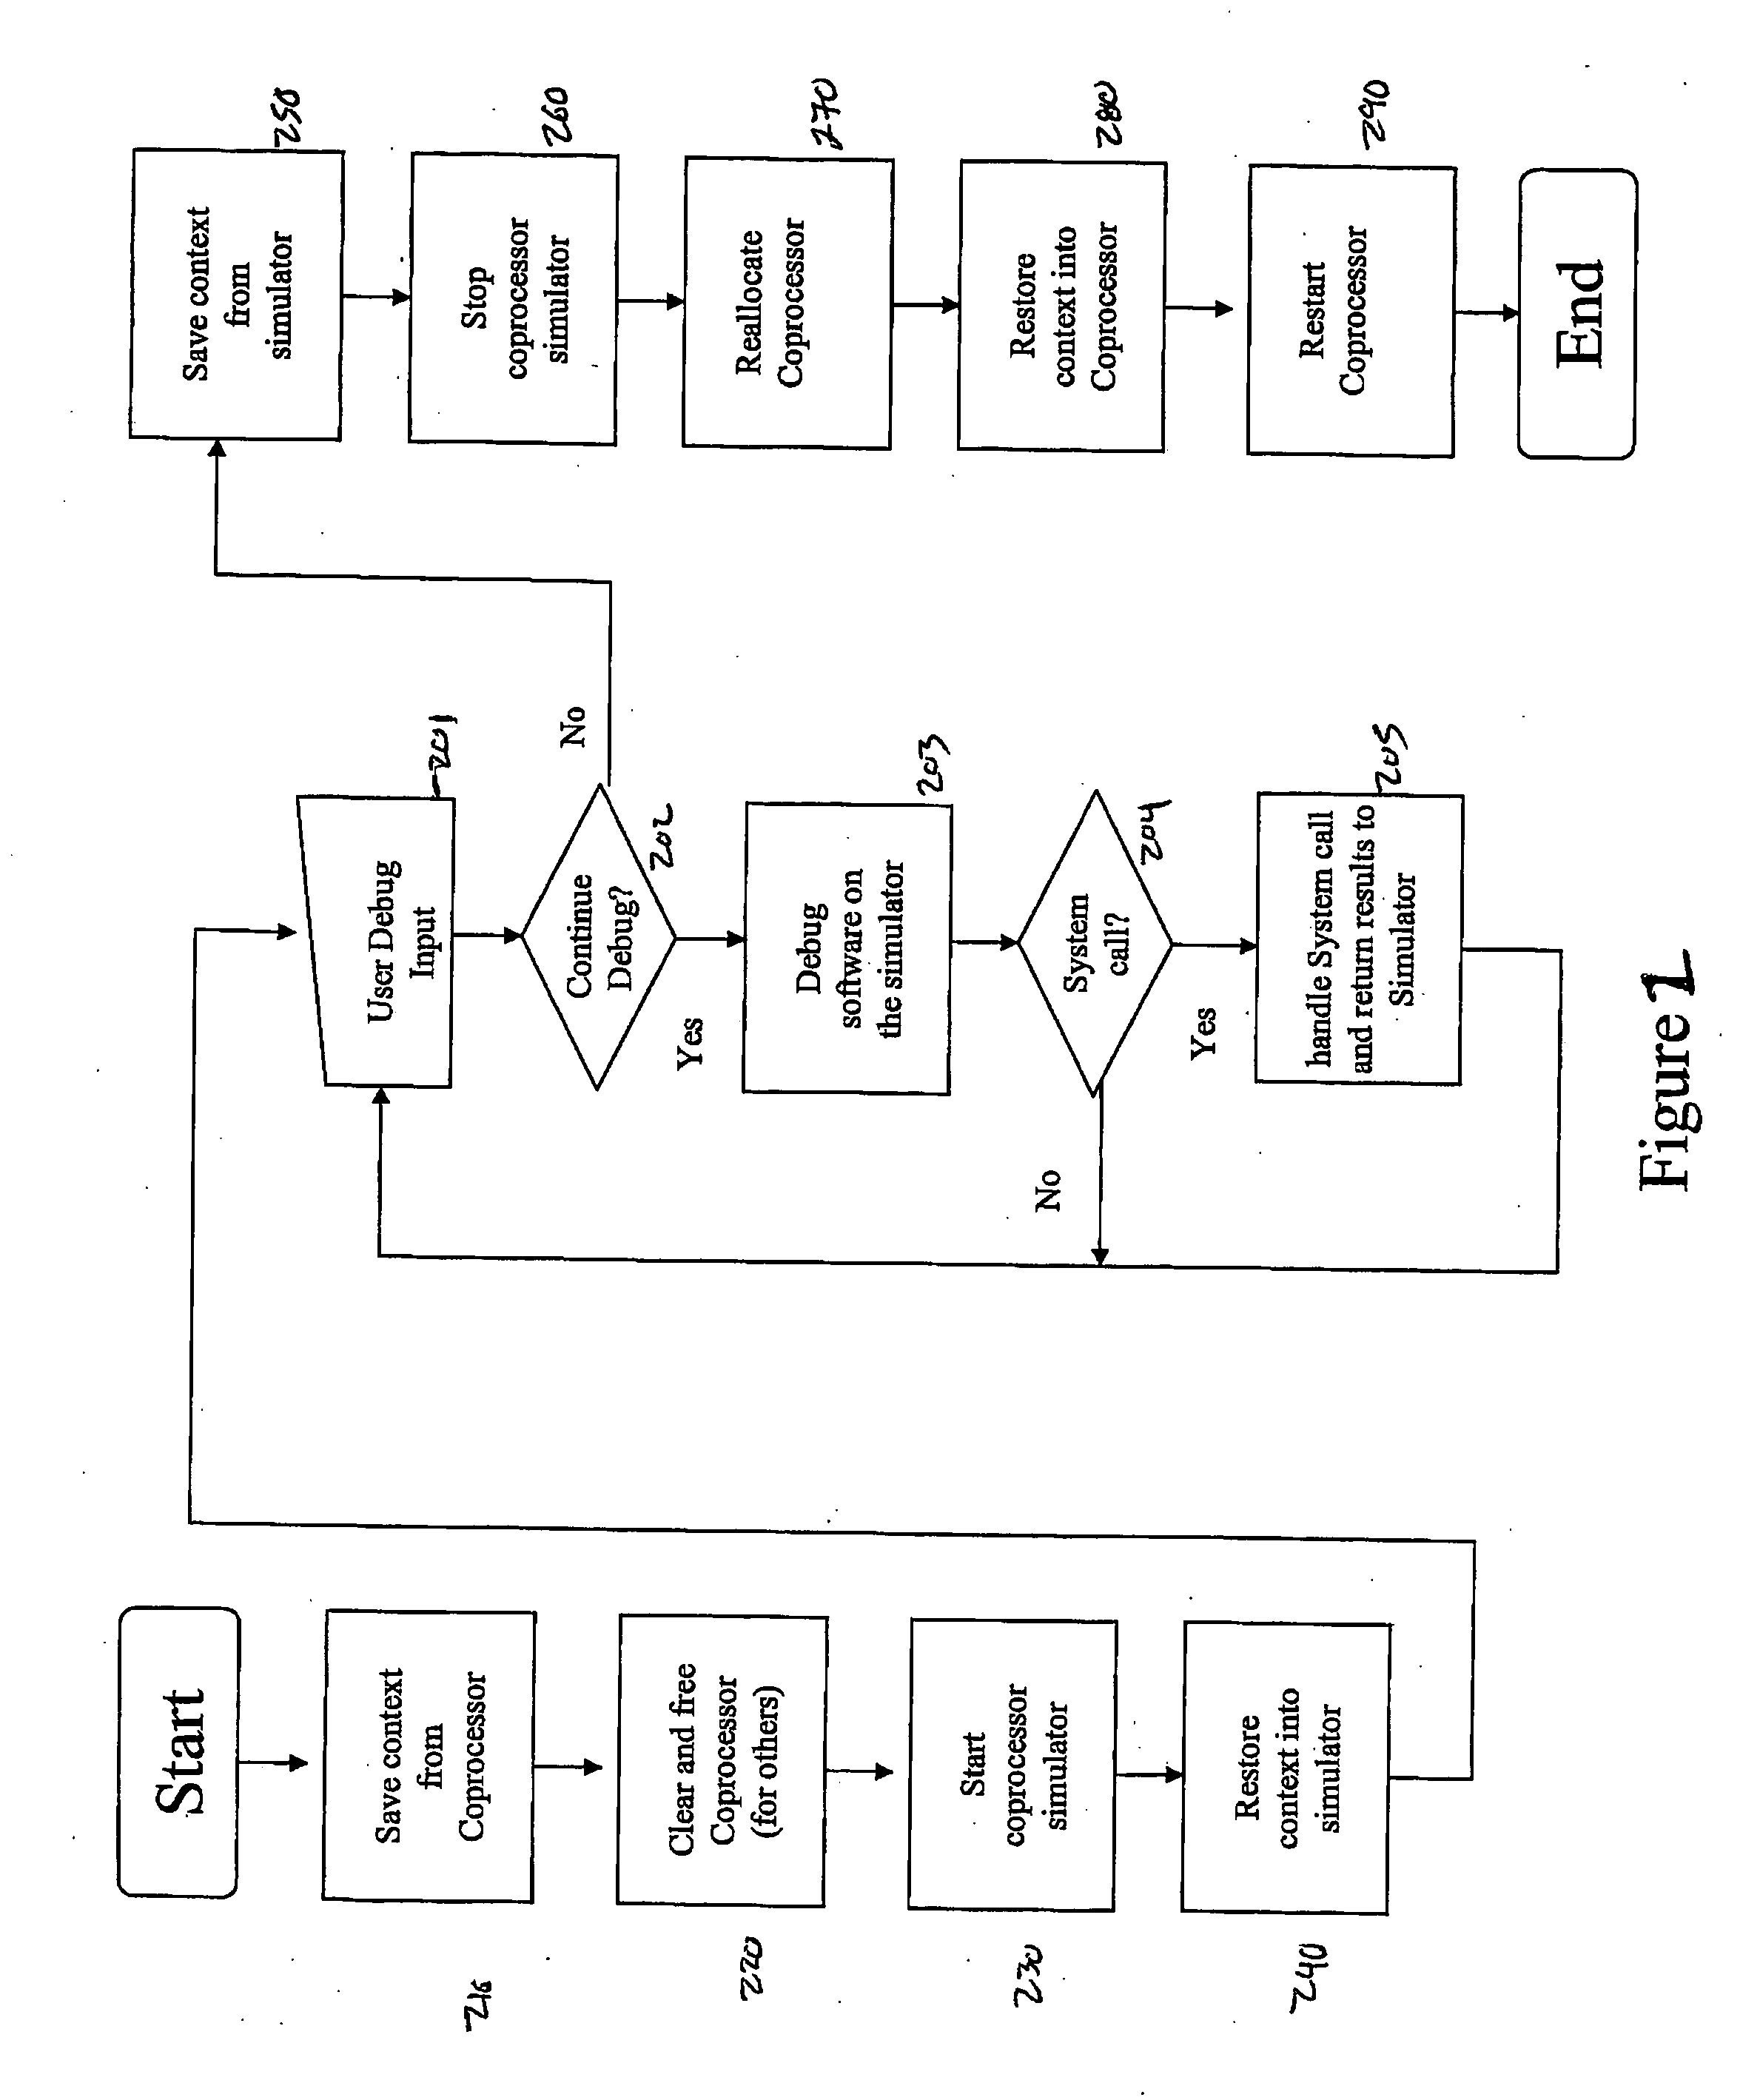 Method and system for software debugging using a simulator